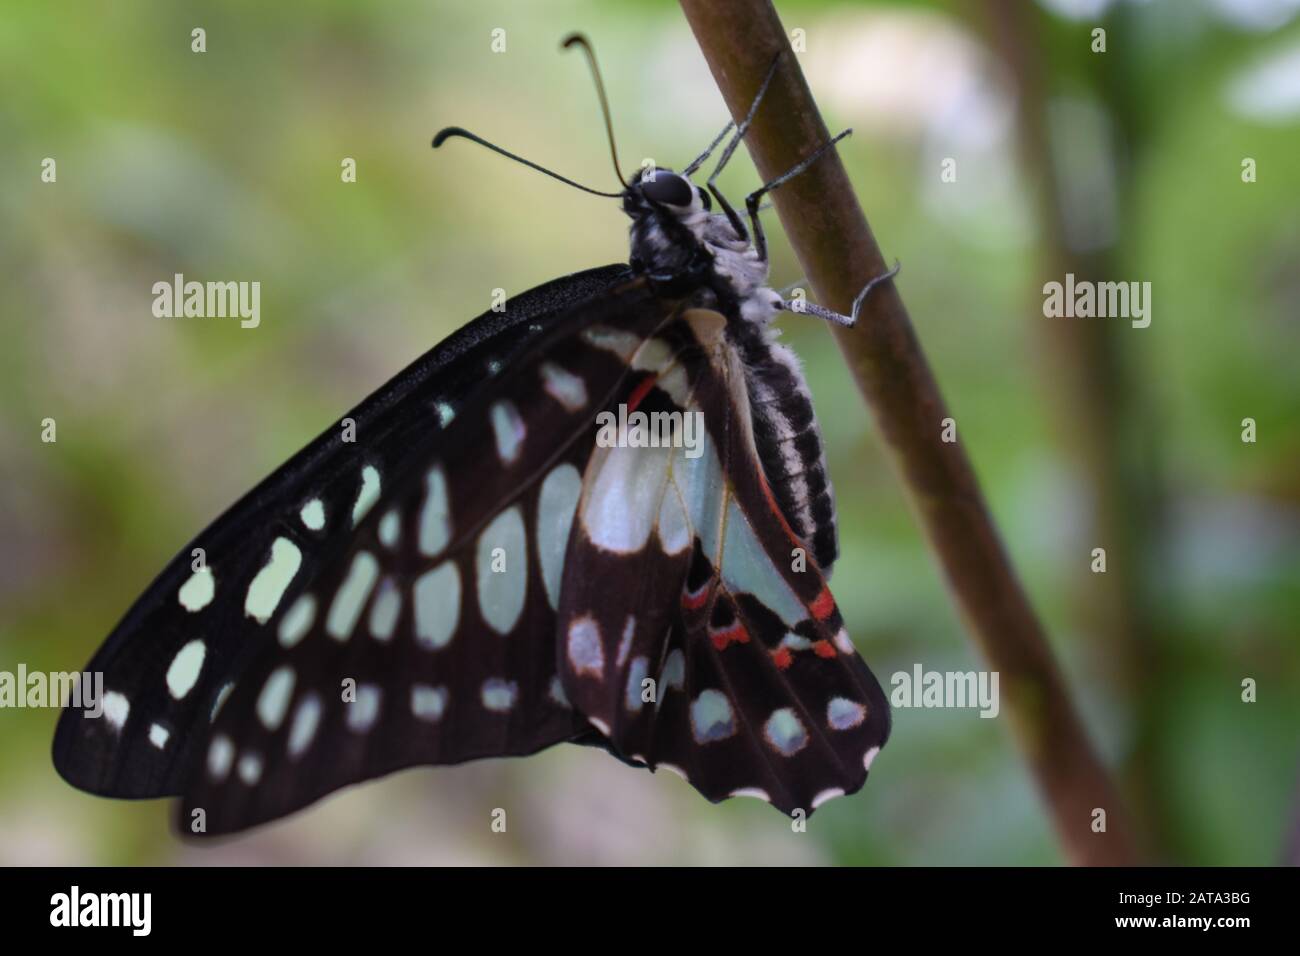 A common jay butterfly (Graphium doson) perched on a branch of alamanda plant. Surakarta, Indonesia. Stock Photo